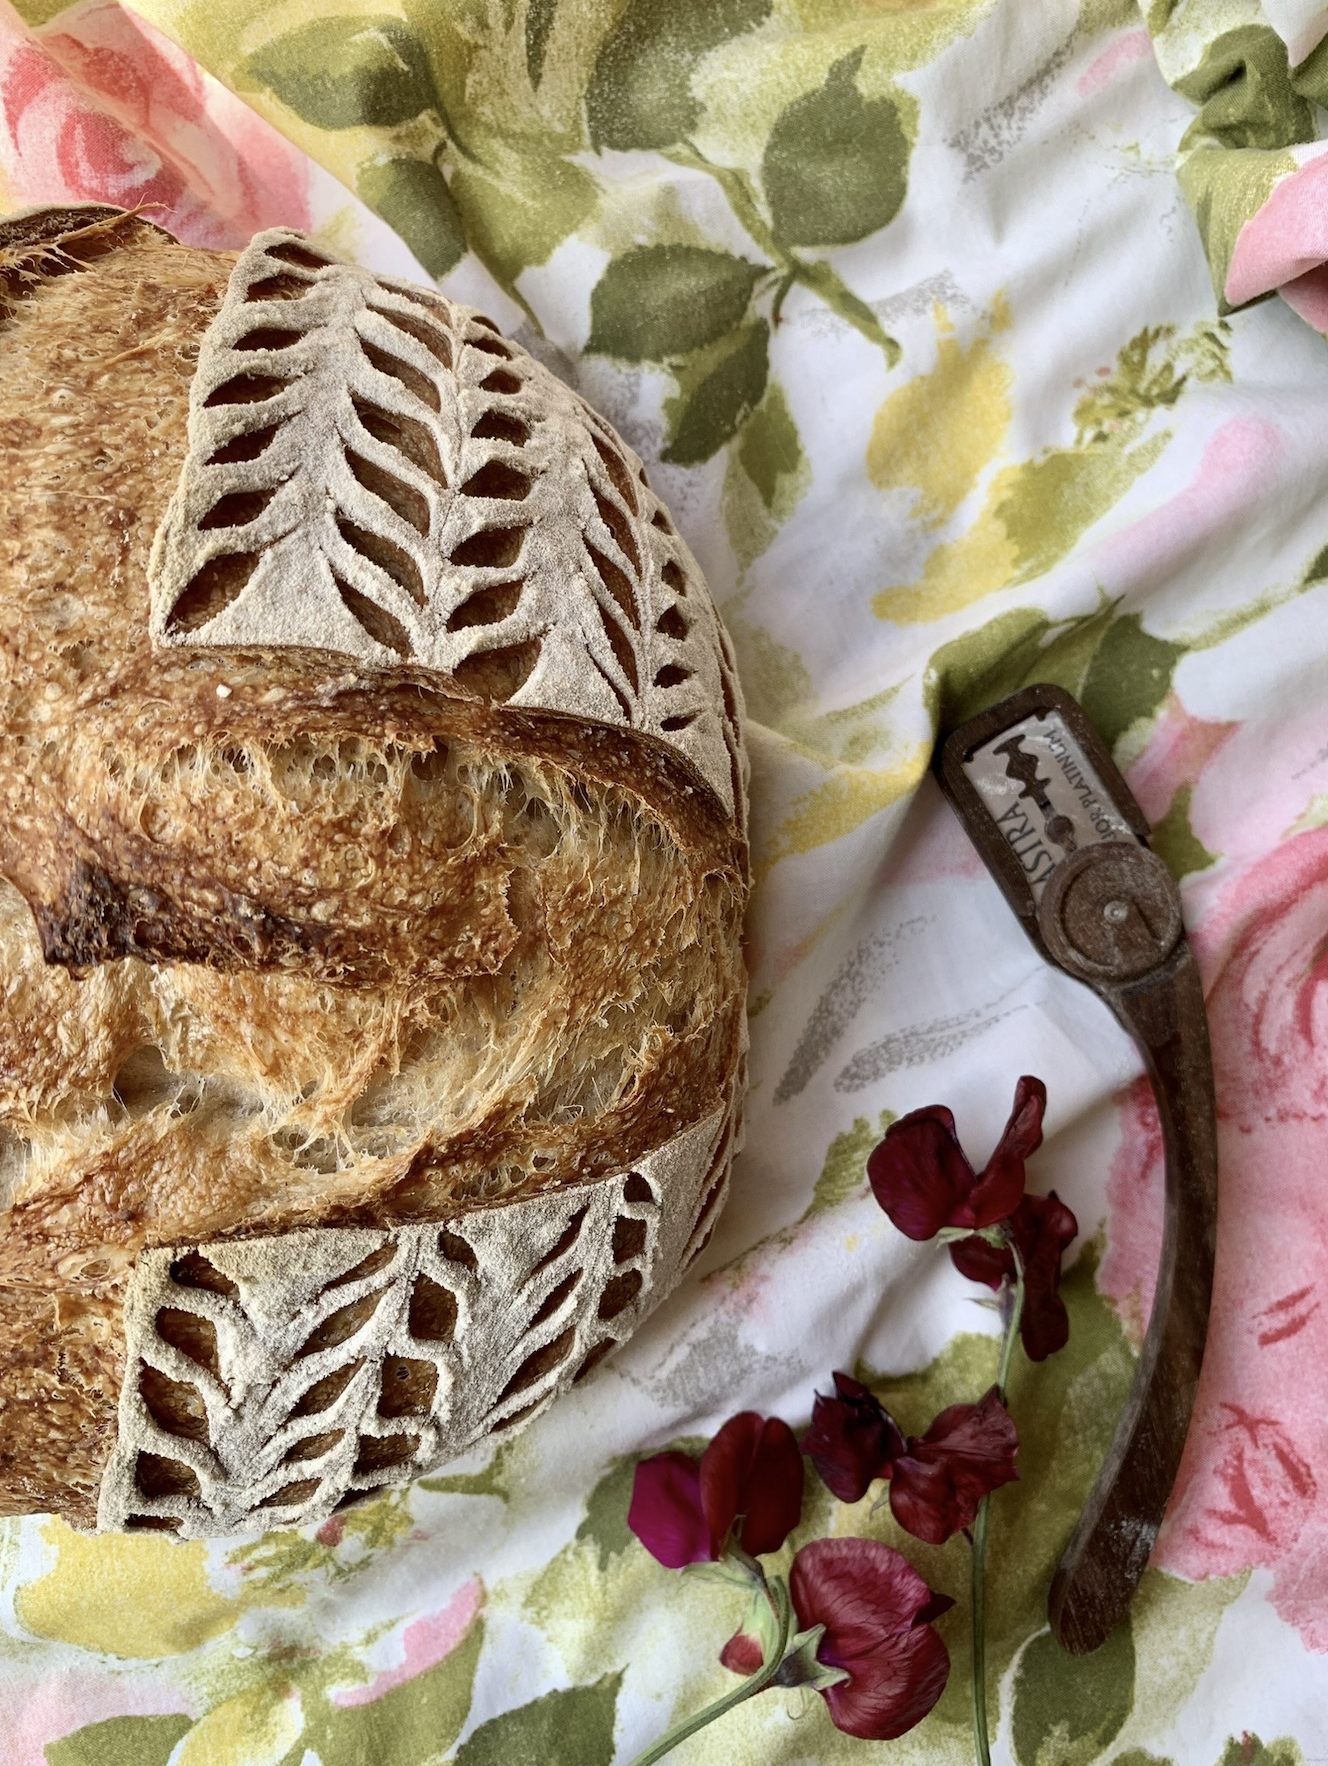 sourdough bread instagram social media influencer content creator on vancouver island in british columbia canada Jaimie from @TheSourdoughFlourist 7